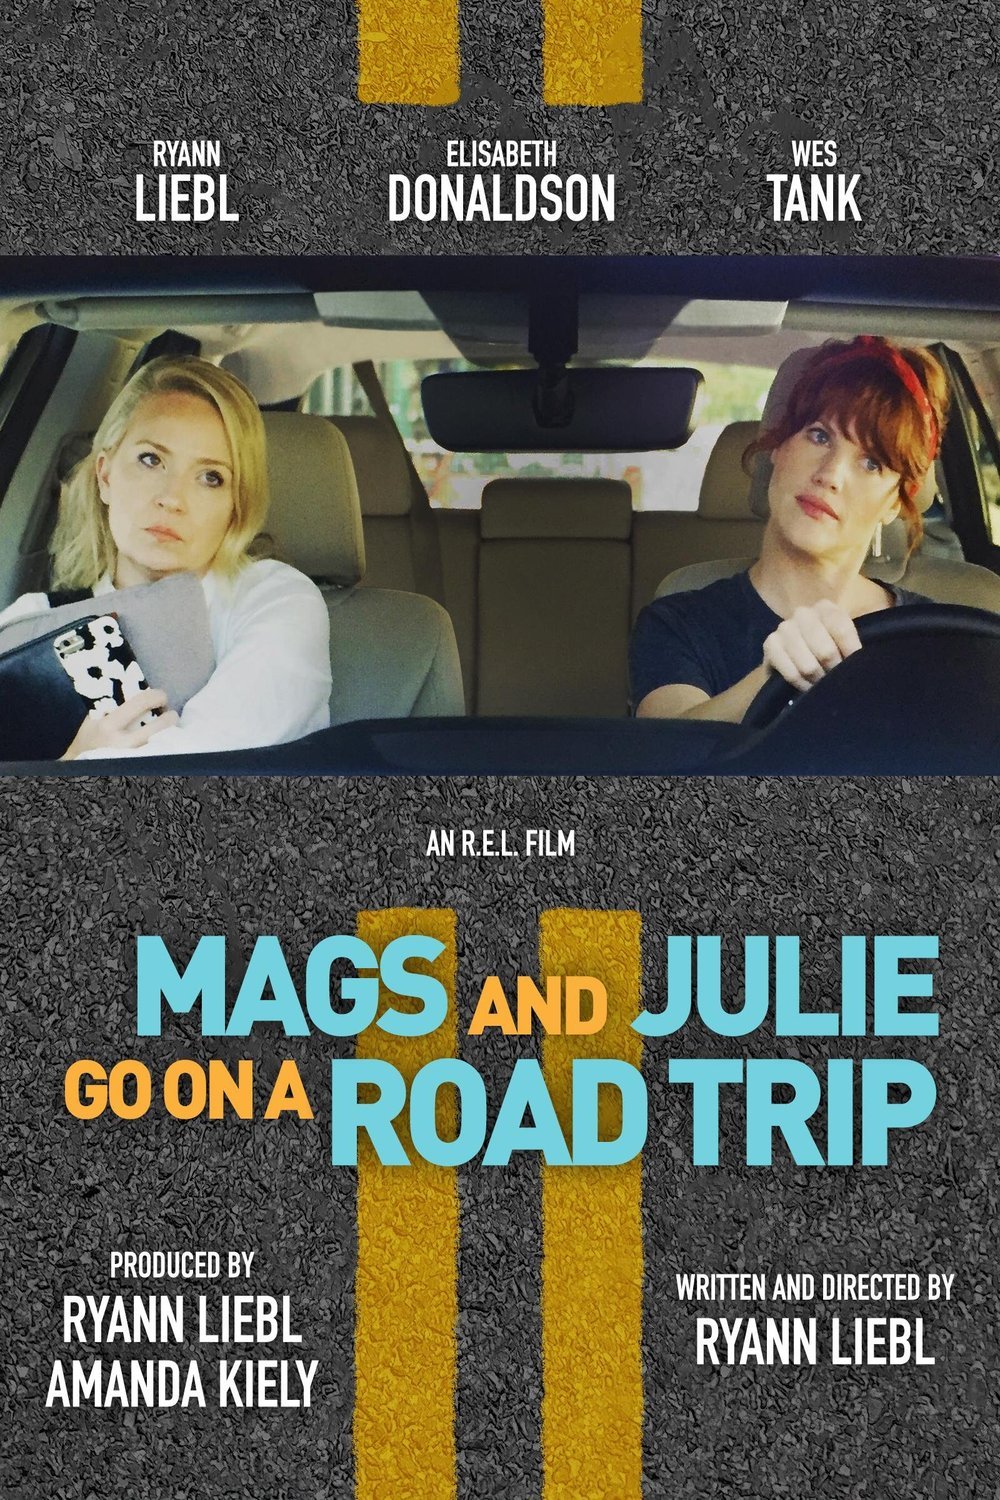 Poster of the movie Mags and Julie go on a Road Trip.